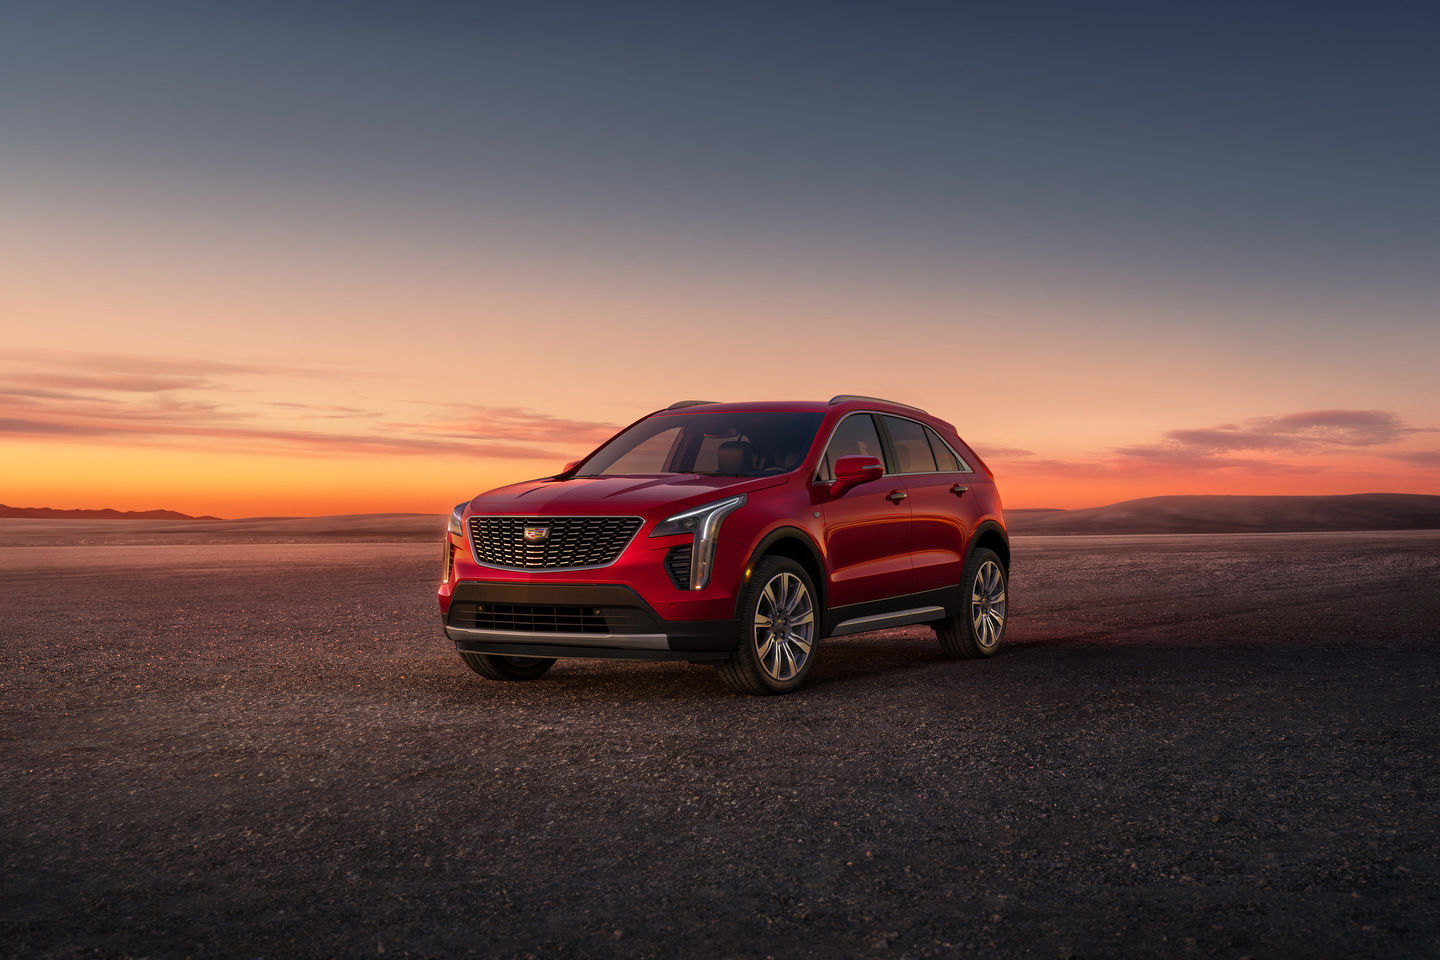 The Cadillac XT4 vs. the Mercedes-Benz GLA - Which is Right for You?